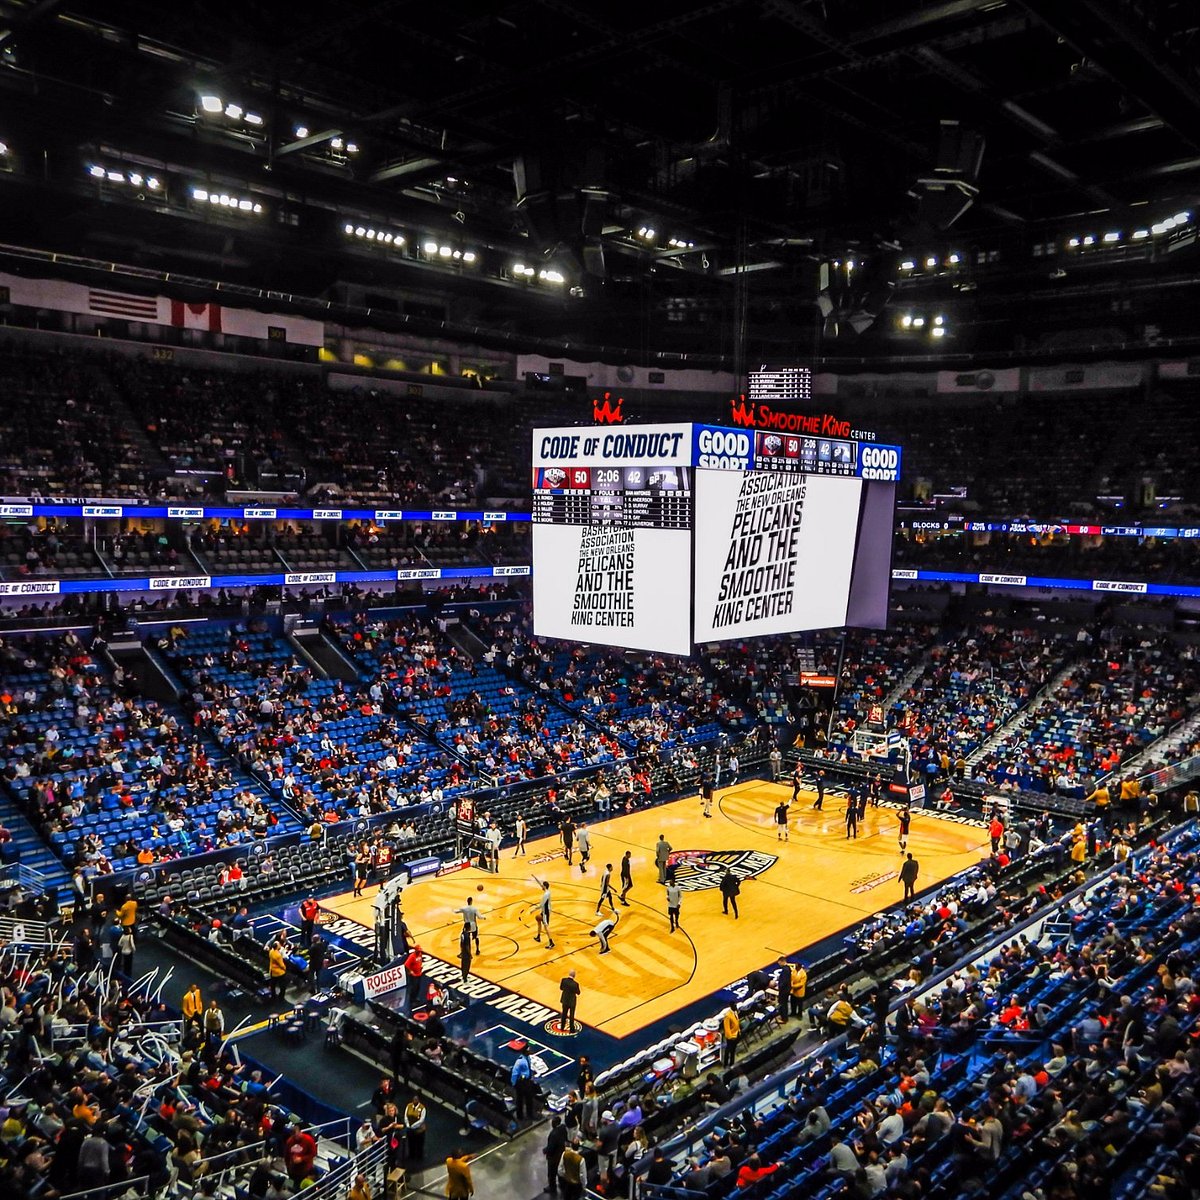 Smoothie King Center Featured Live Event Tickets & 2023 Schedules